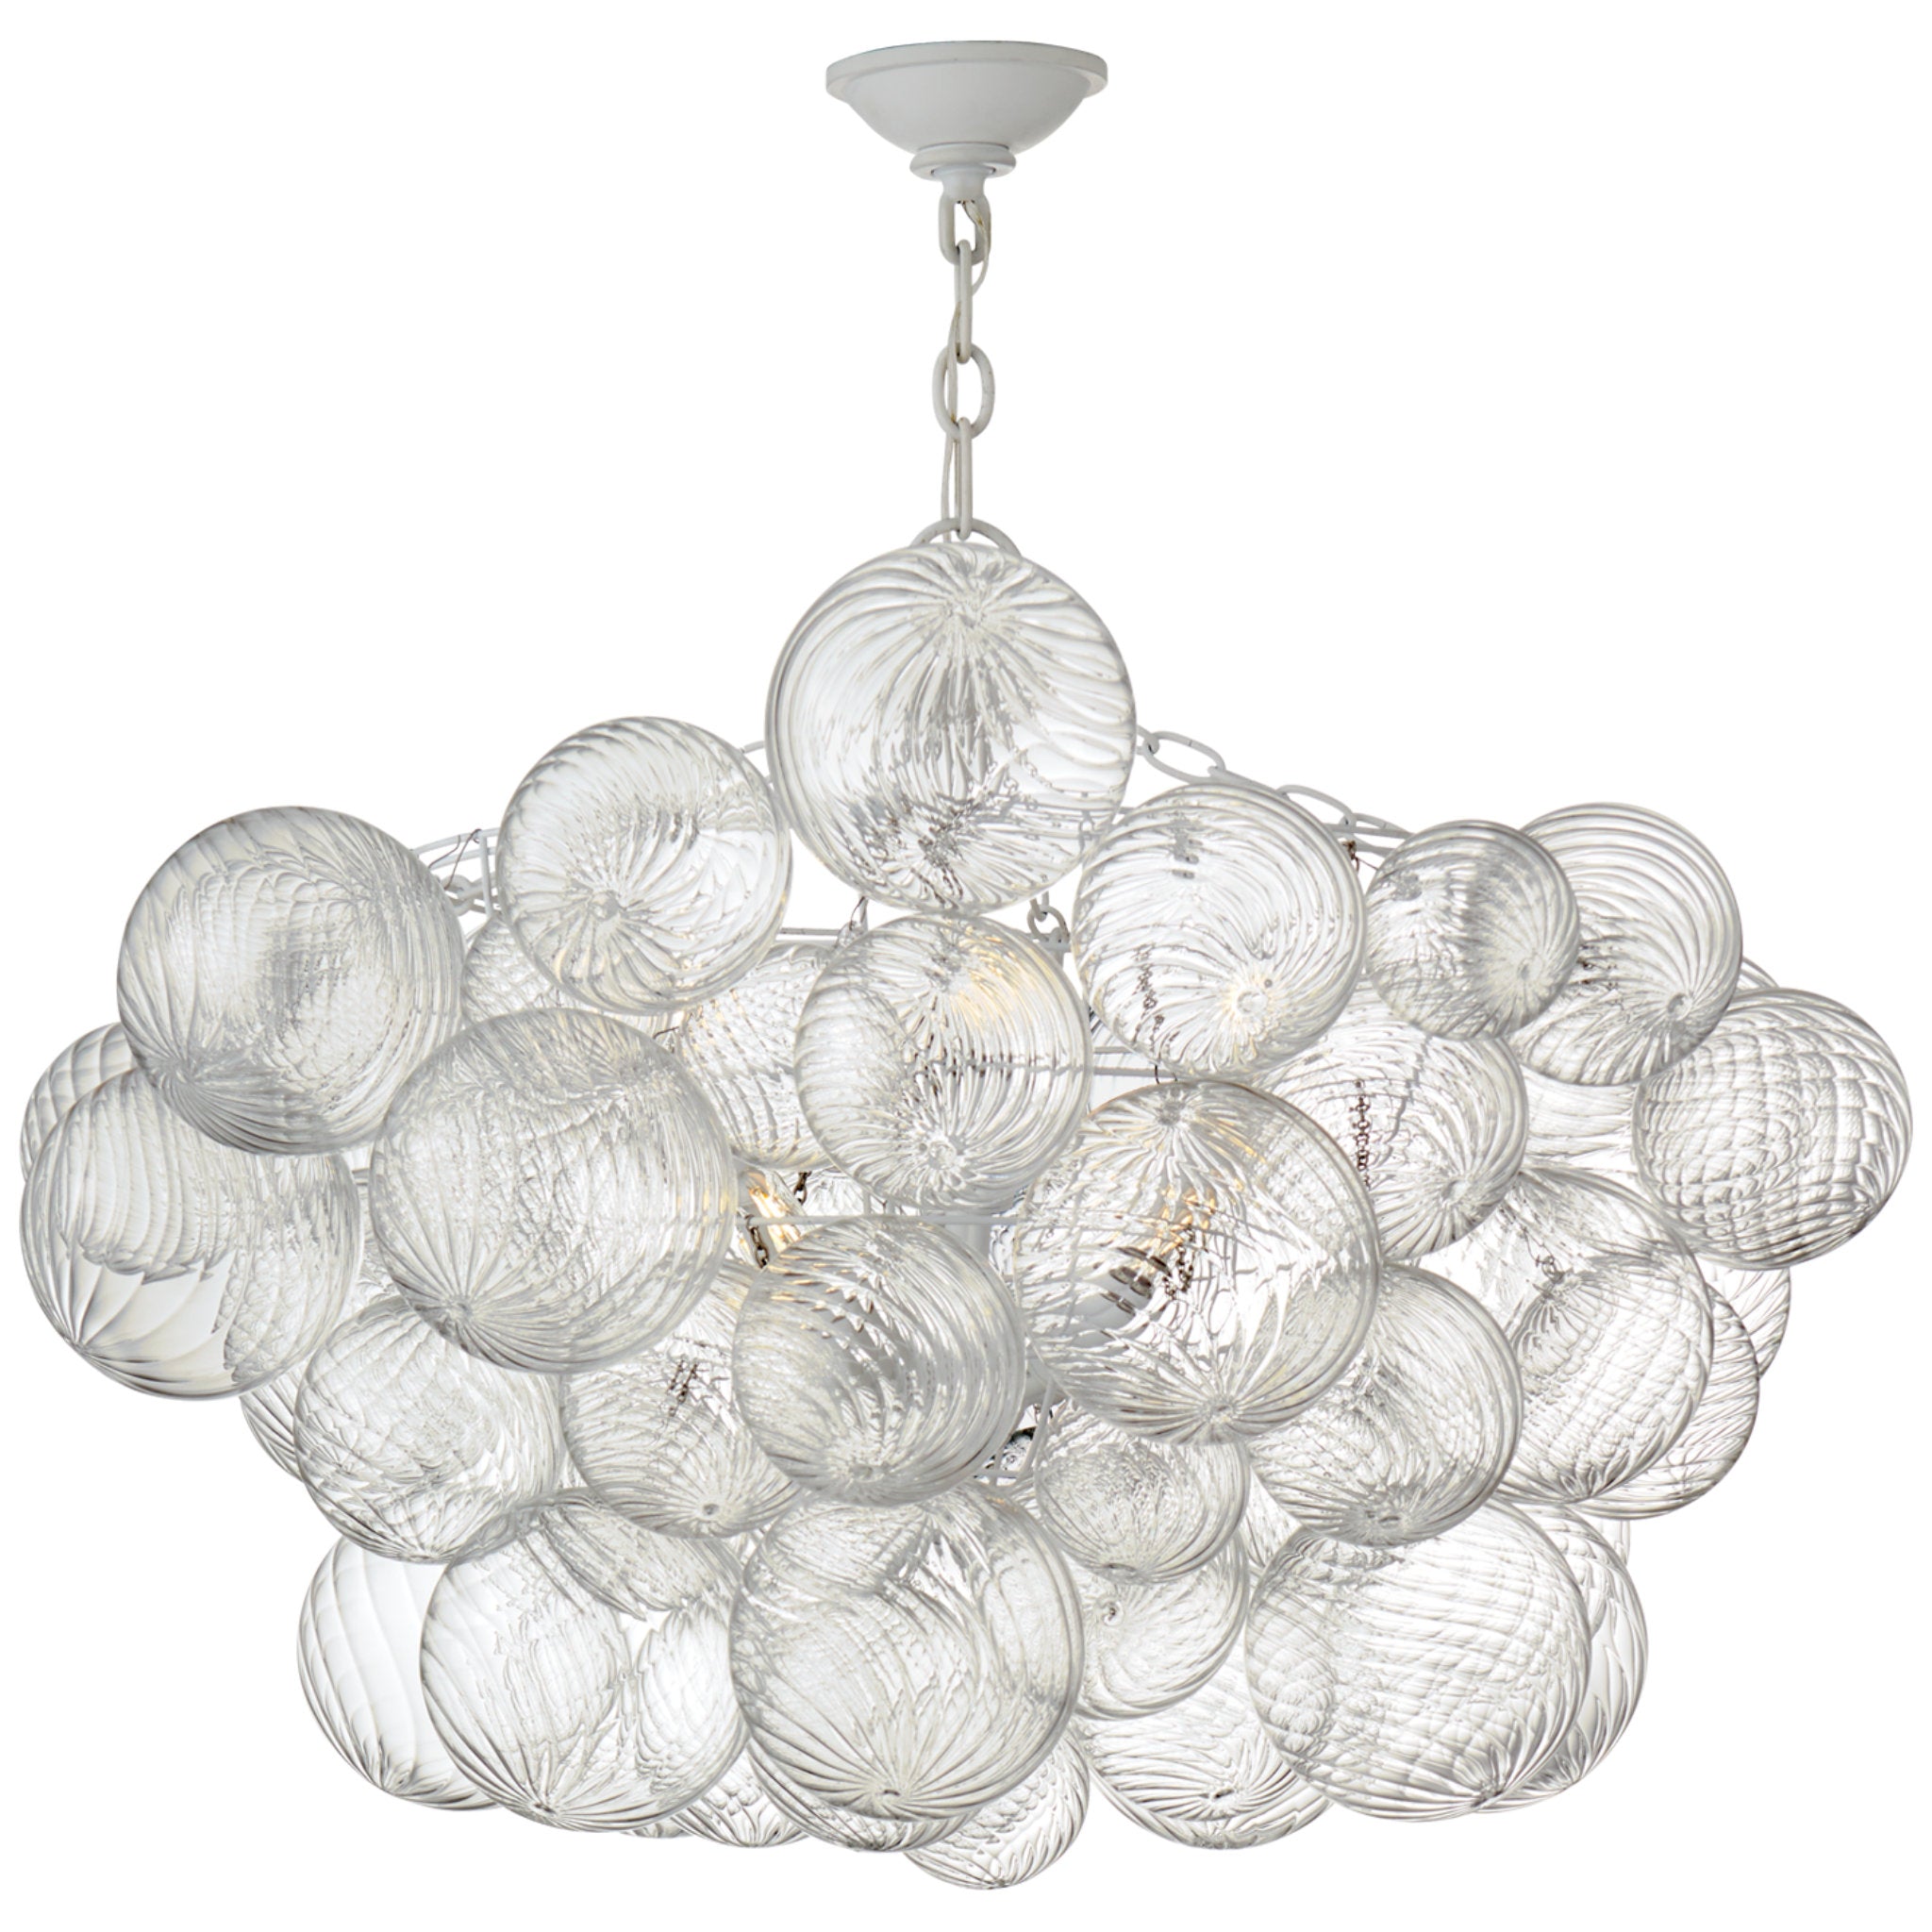 Julie Neill Talia Large Chandelier in Plaster White and Clear Swirled Glass